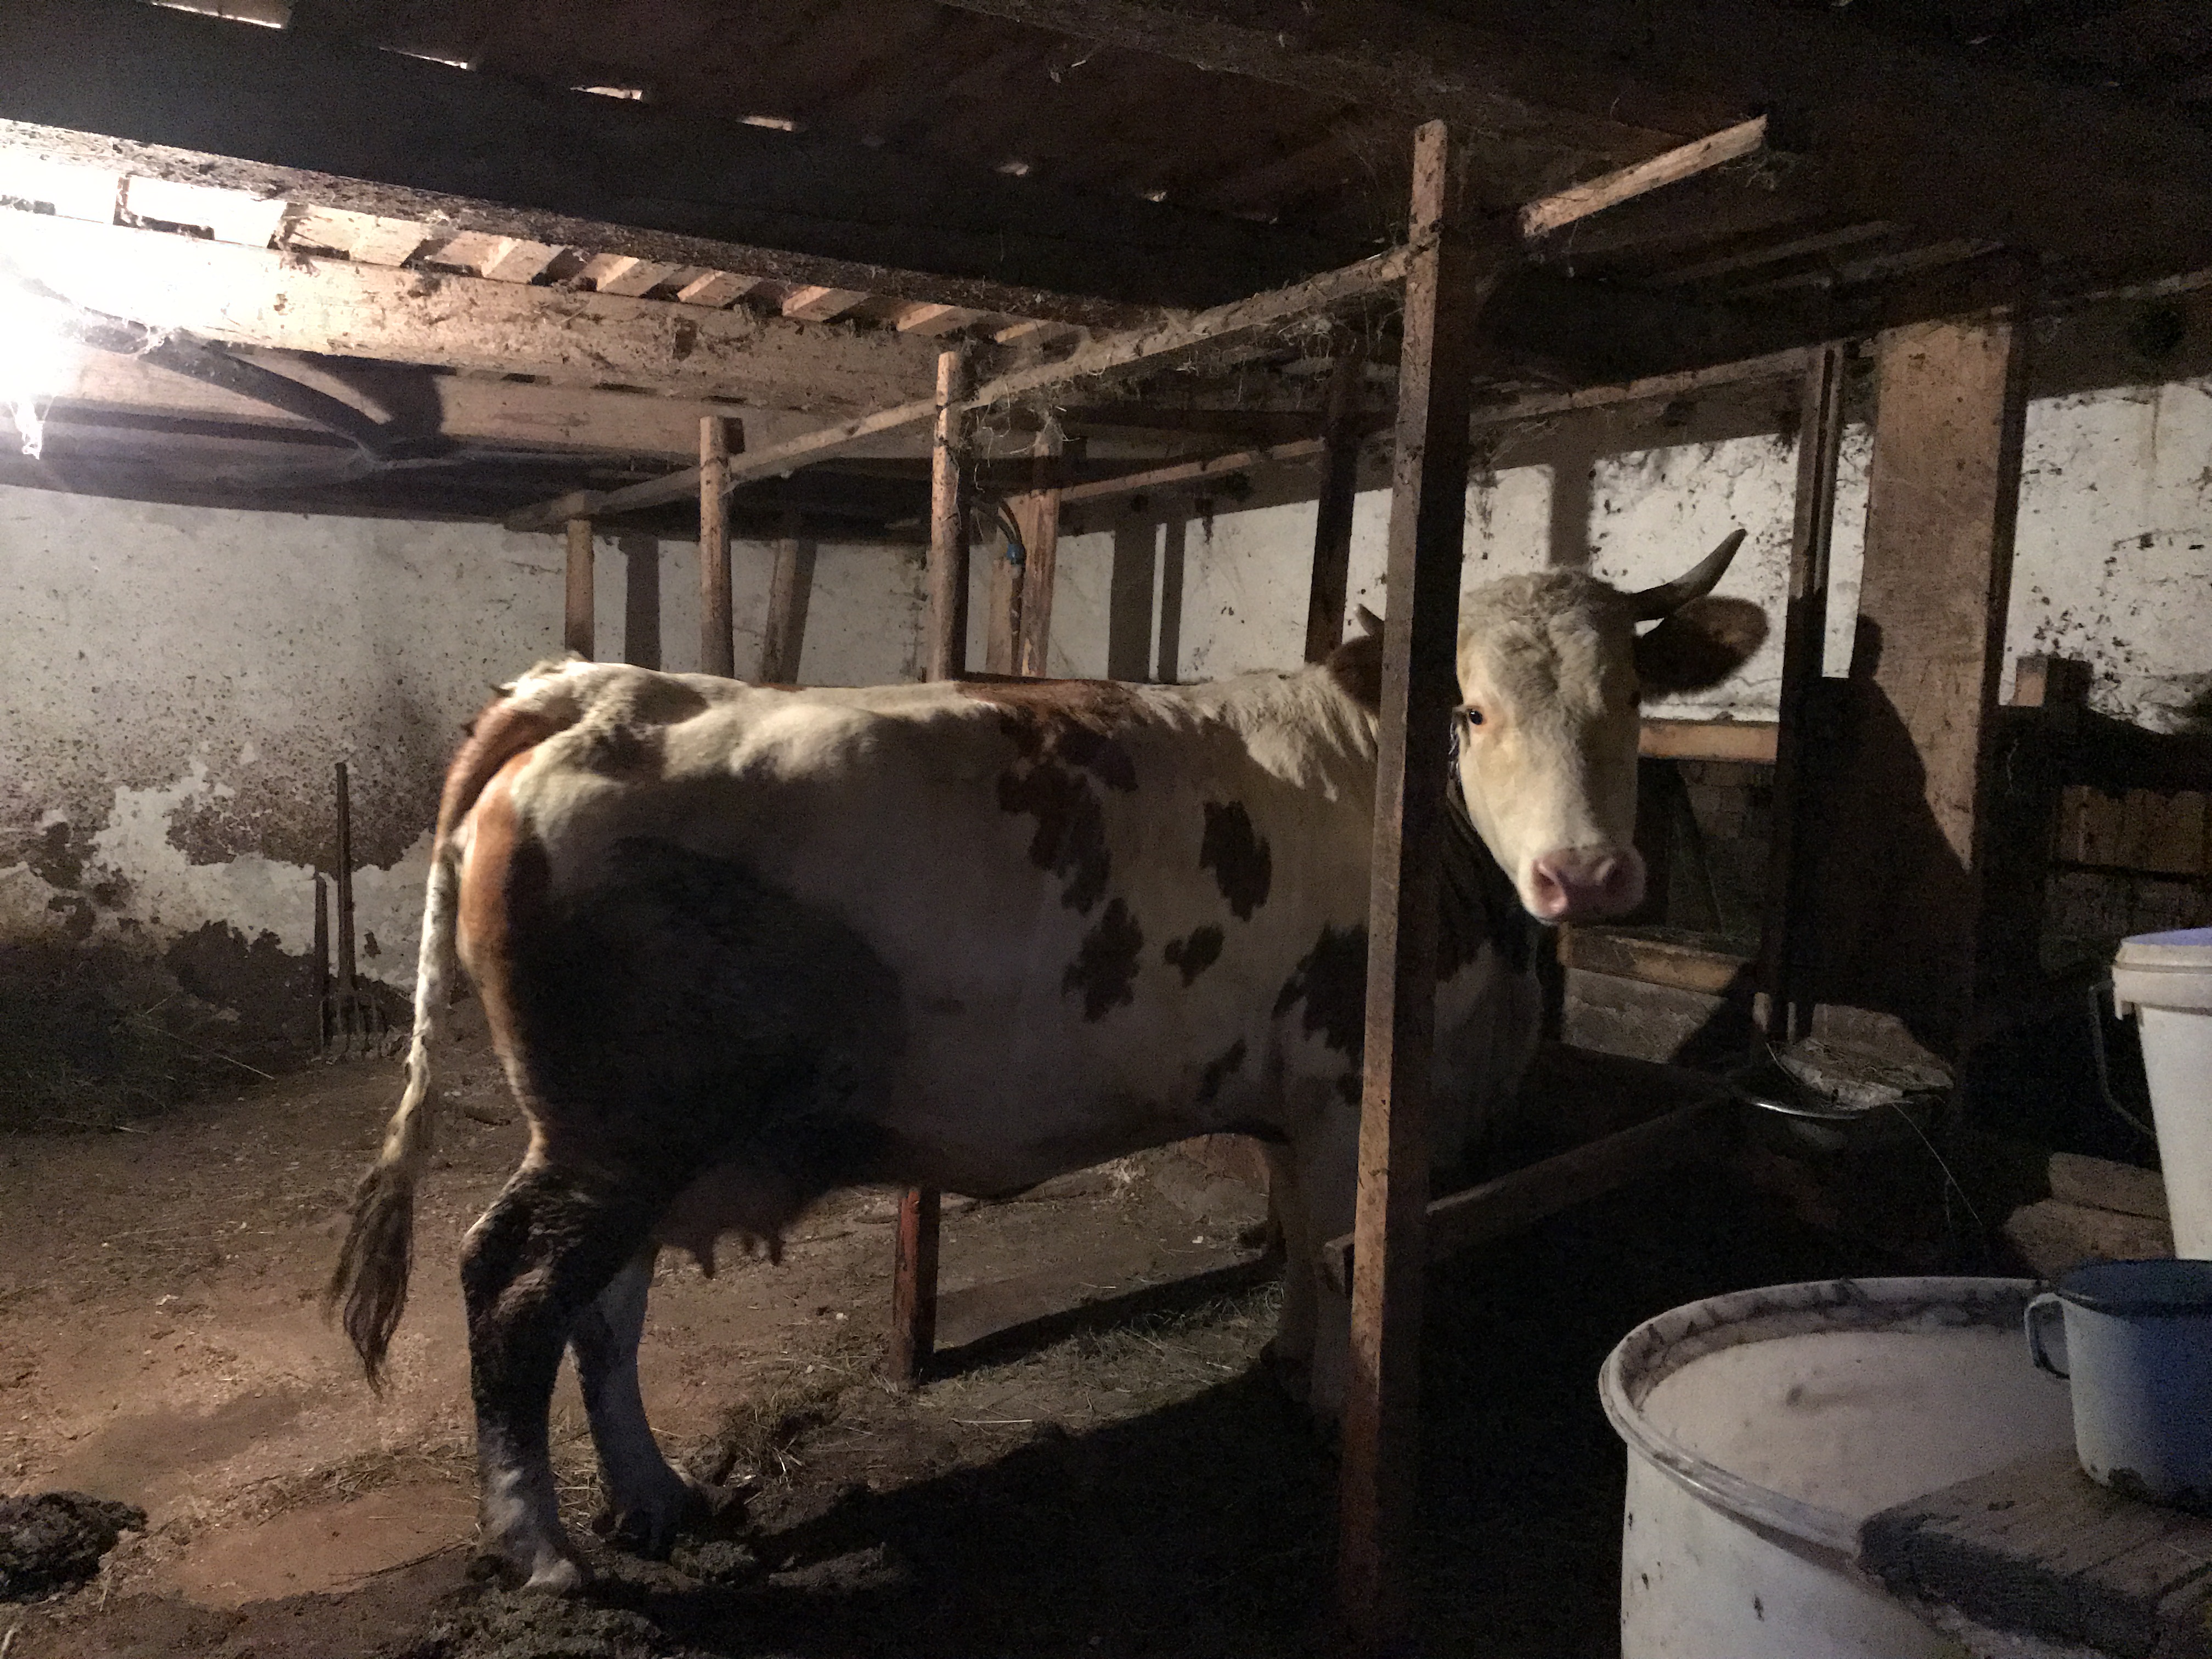 Cow in the stable, Romania